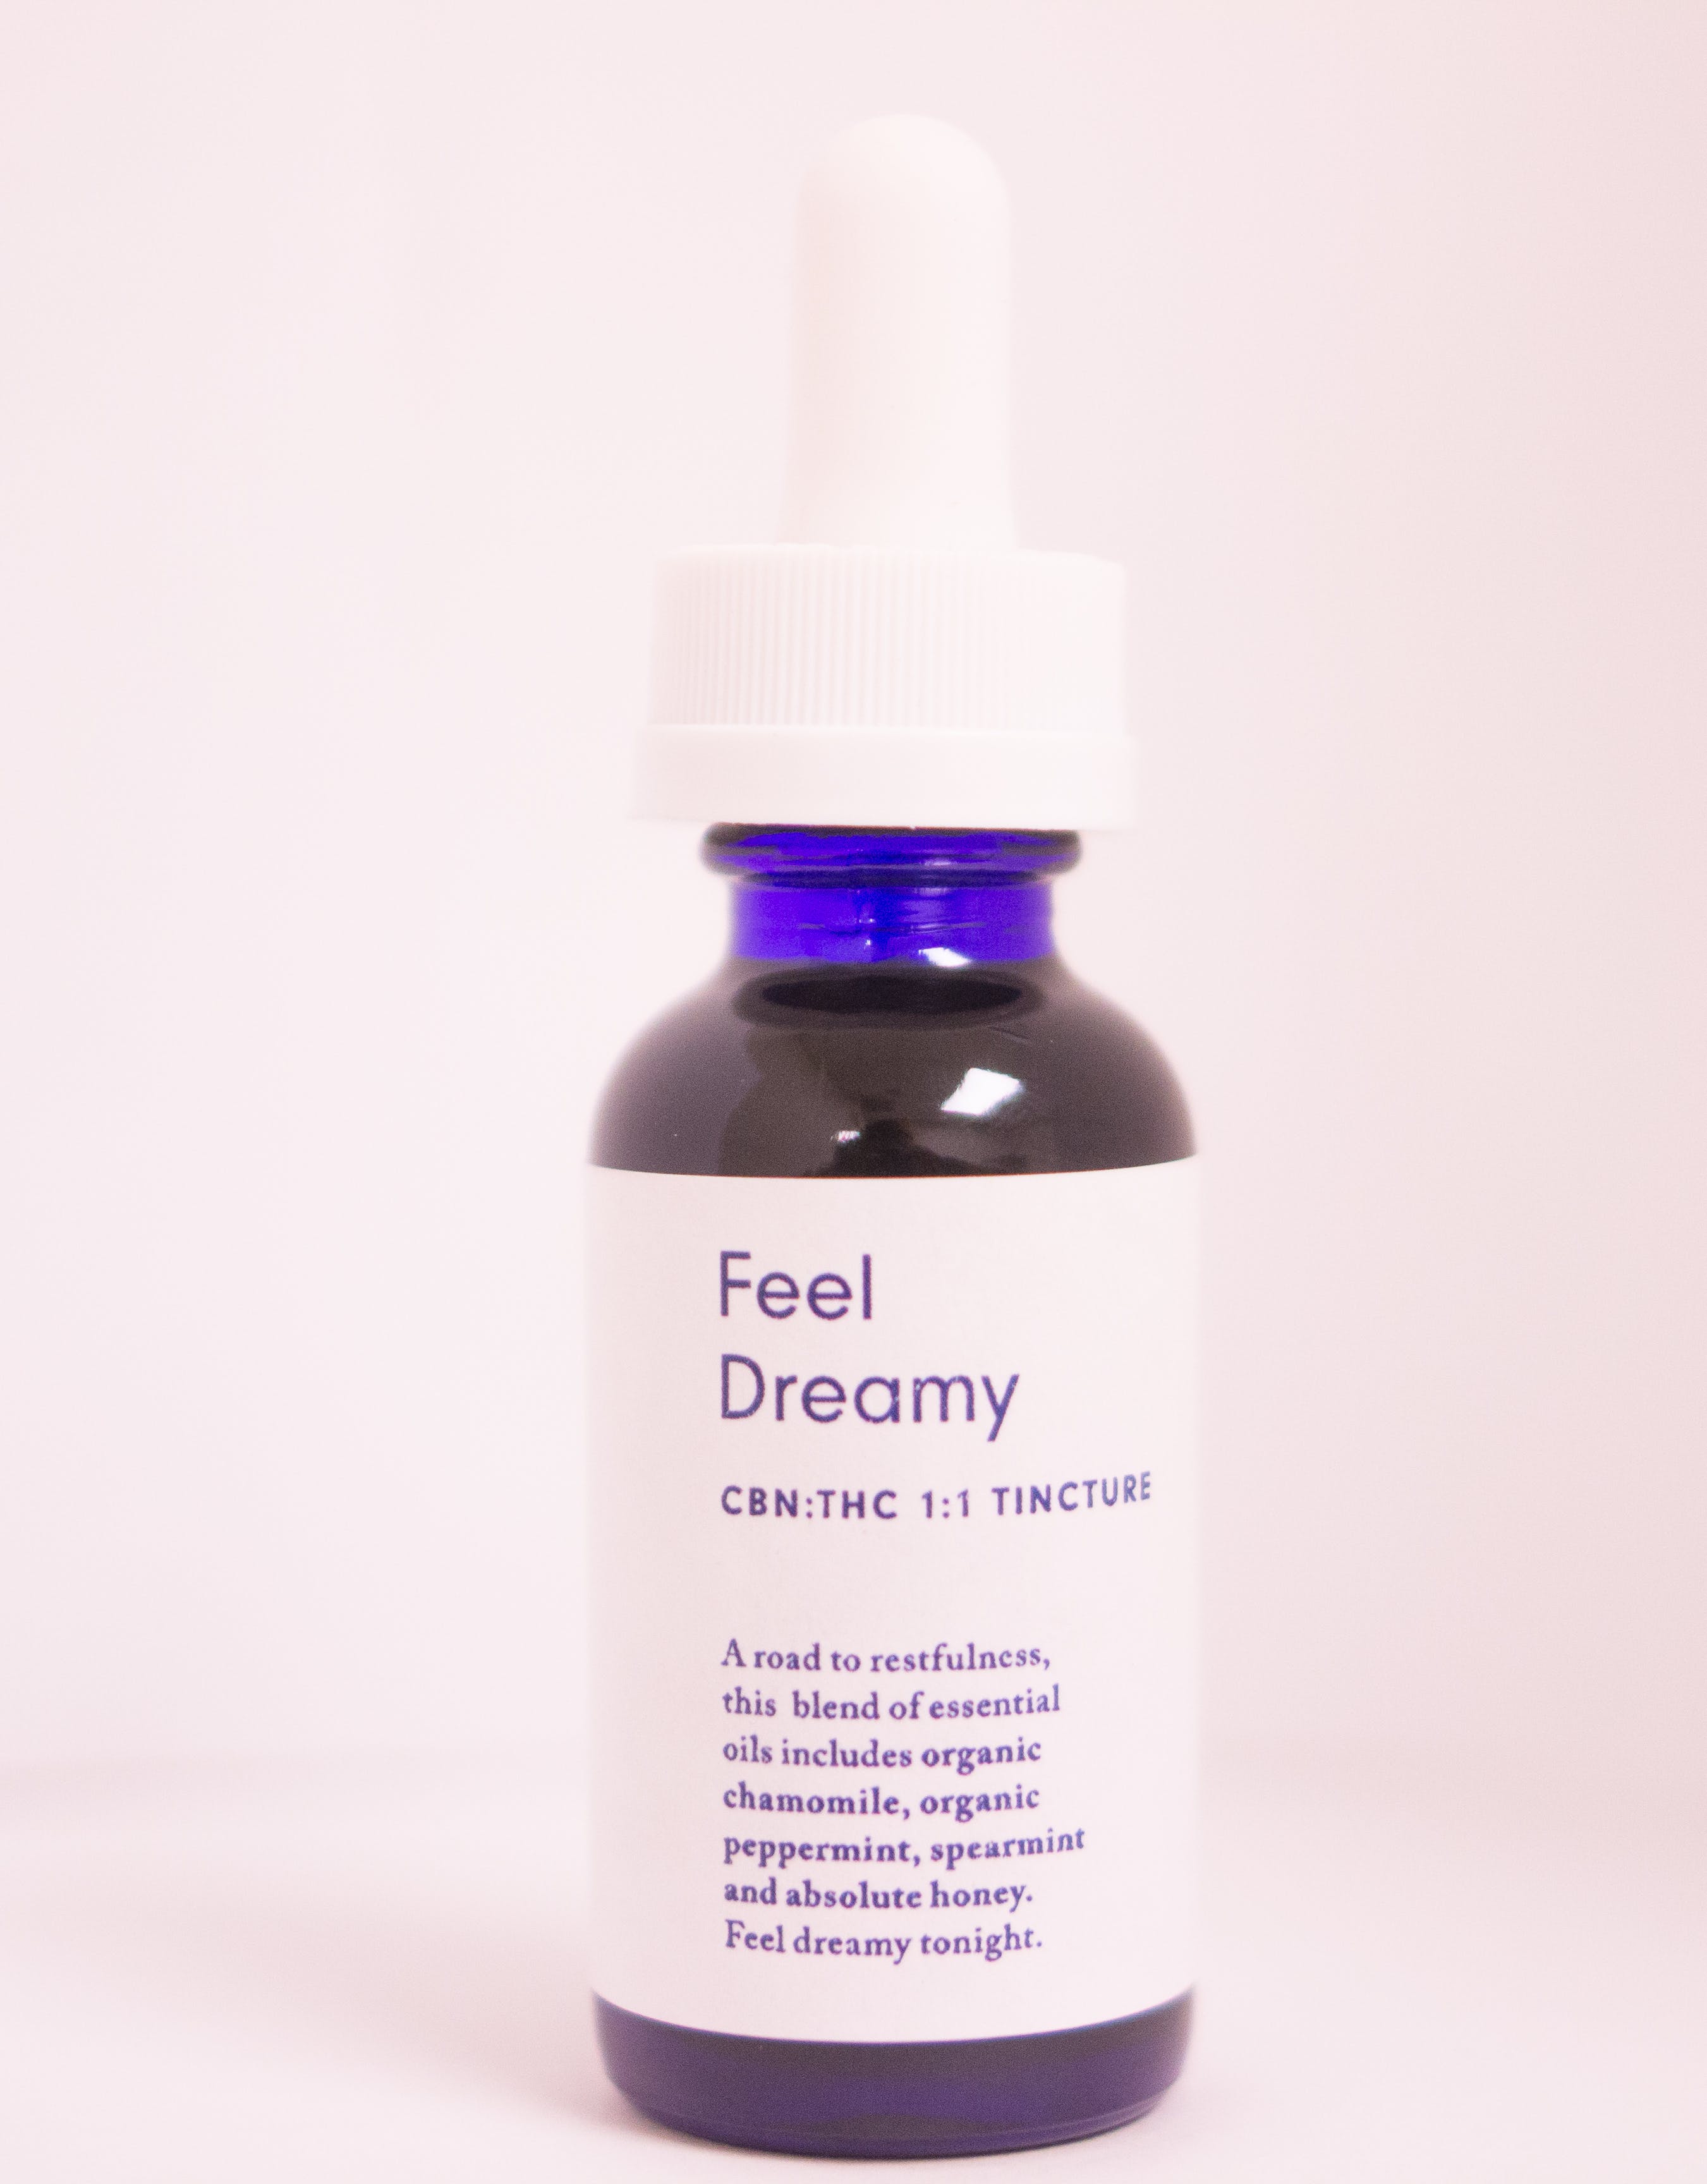 marijuana-dispensaries-11722-reisterstown-road-reisterstown-feel-dreamy-cbn-11-tincture-by-the-feel-connection